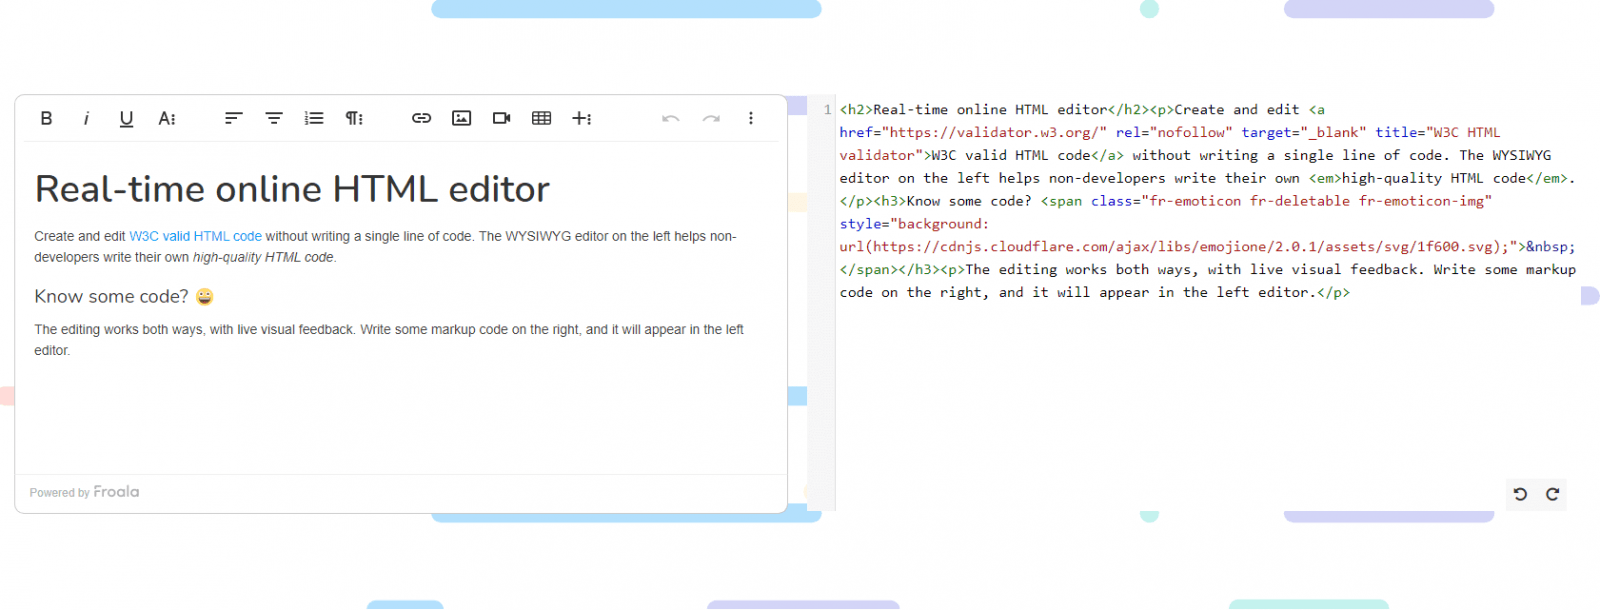 An online HTML editor interface, focusing on its layout and user-friendly features